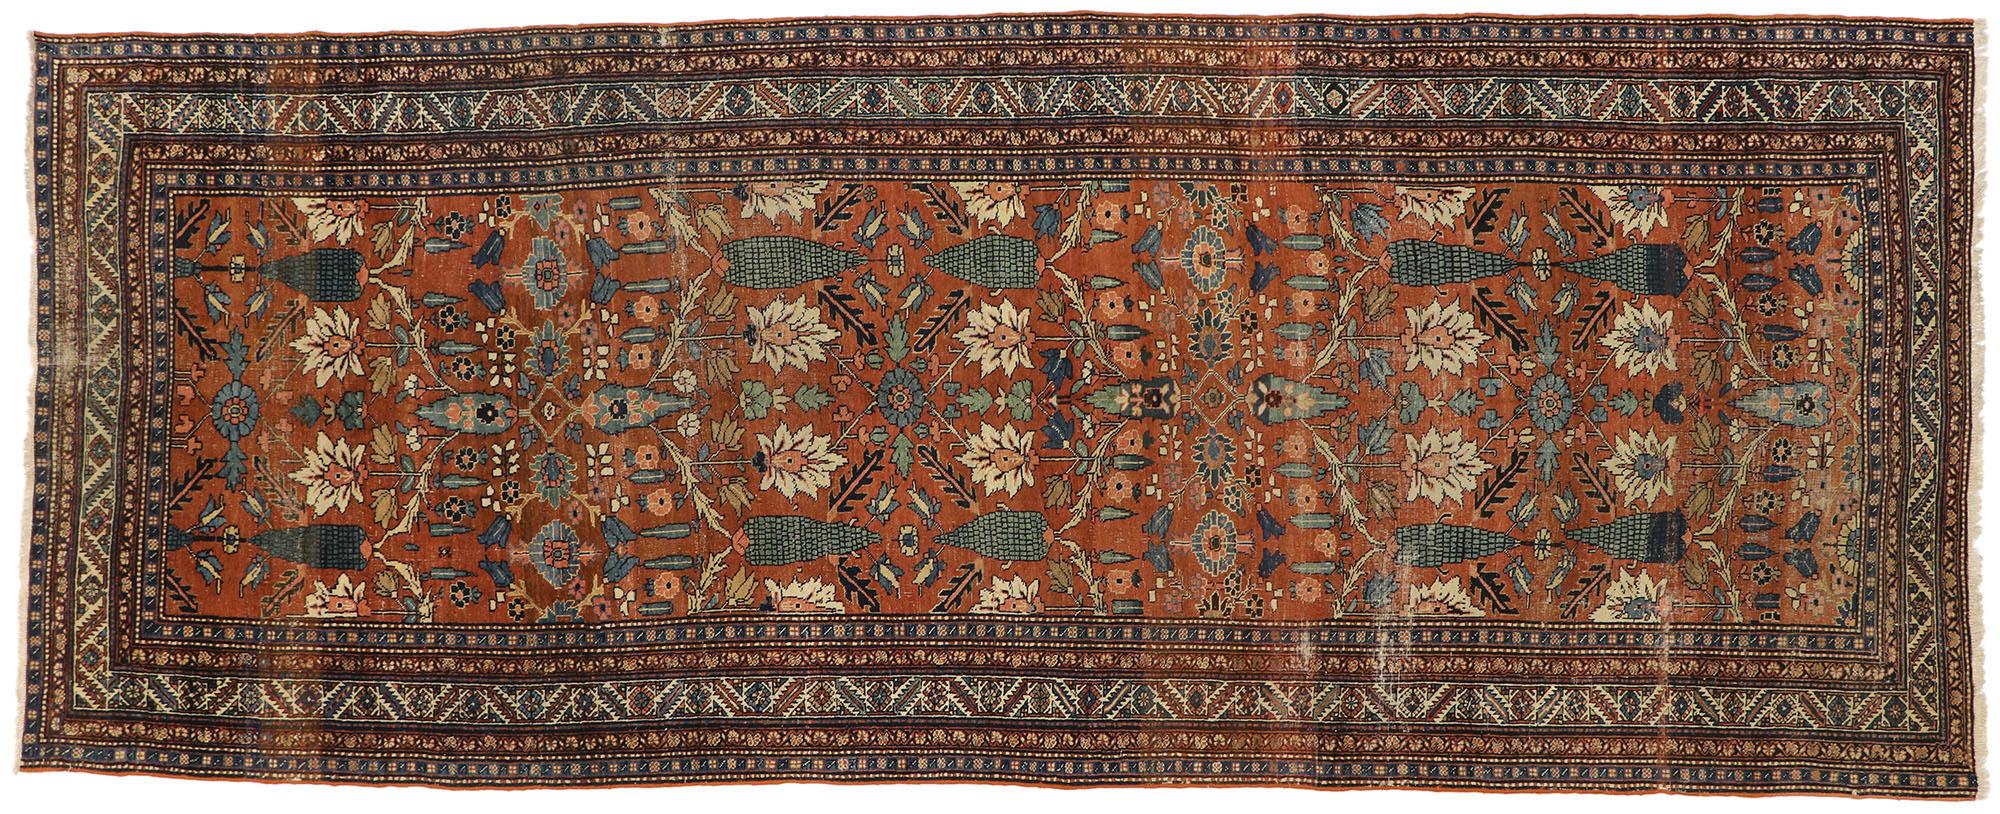 76754, Late 19th Century Antique Persian Bakshaish Gallery Rug with Arts & Crafts Style. This hand-knotted wool antique Persian Bakshaish gallery rug features an all-over botanical design composed of cypress trees, palmettes, flowers, lotus,